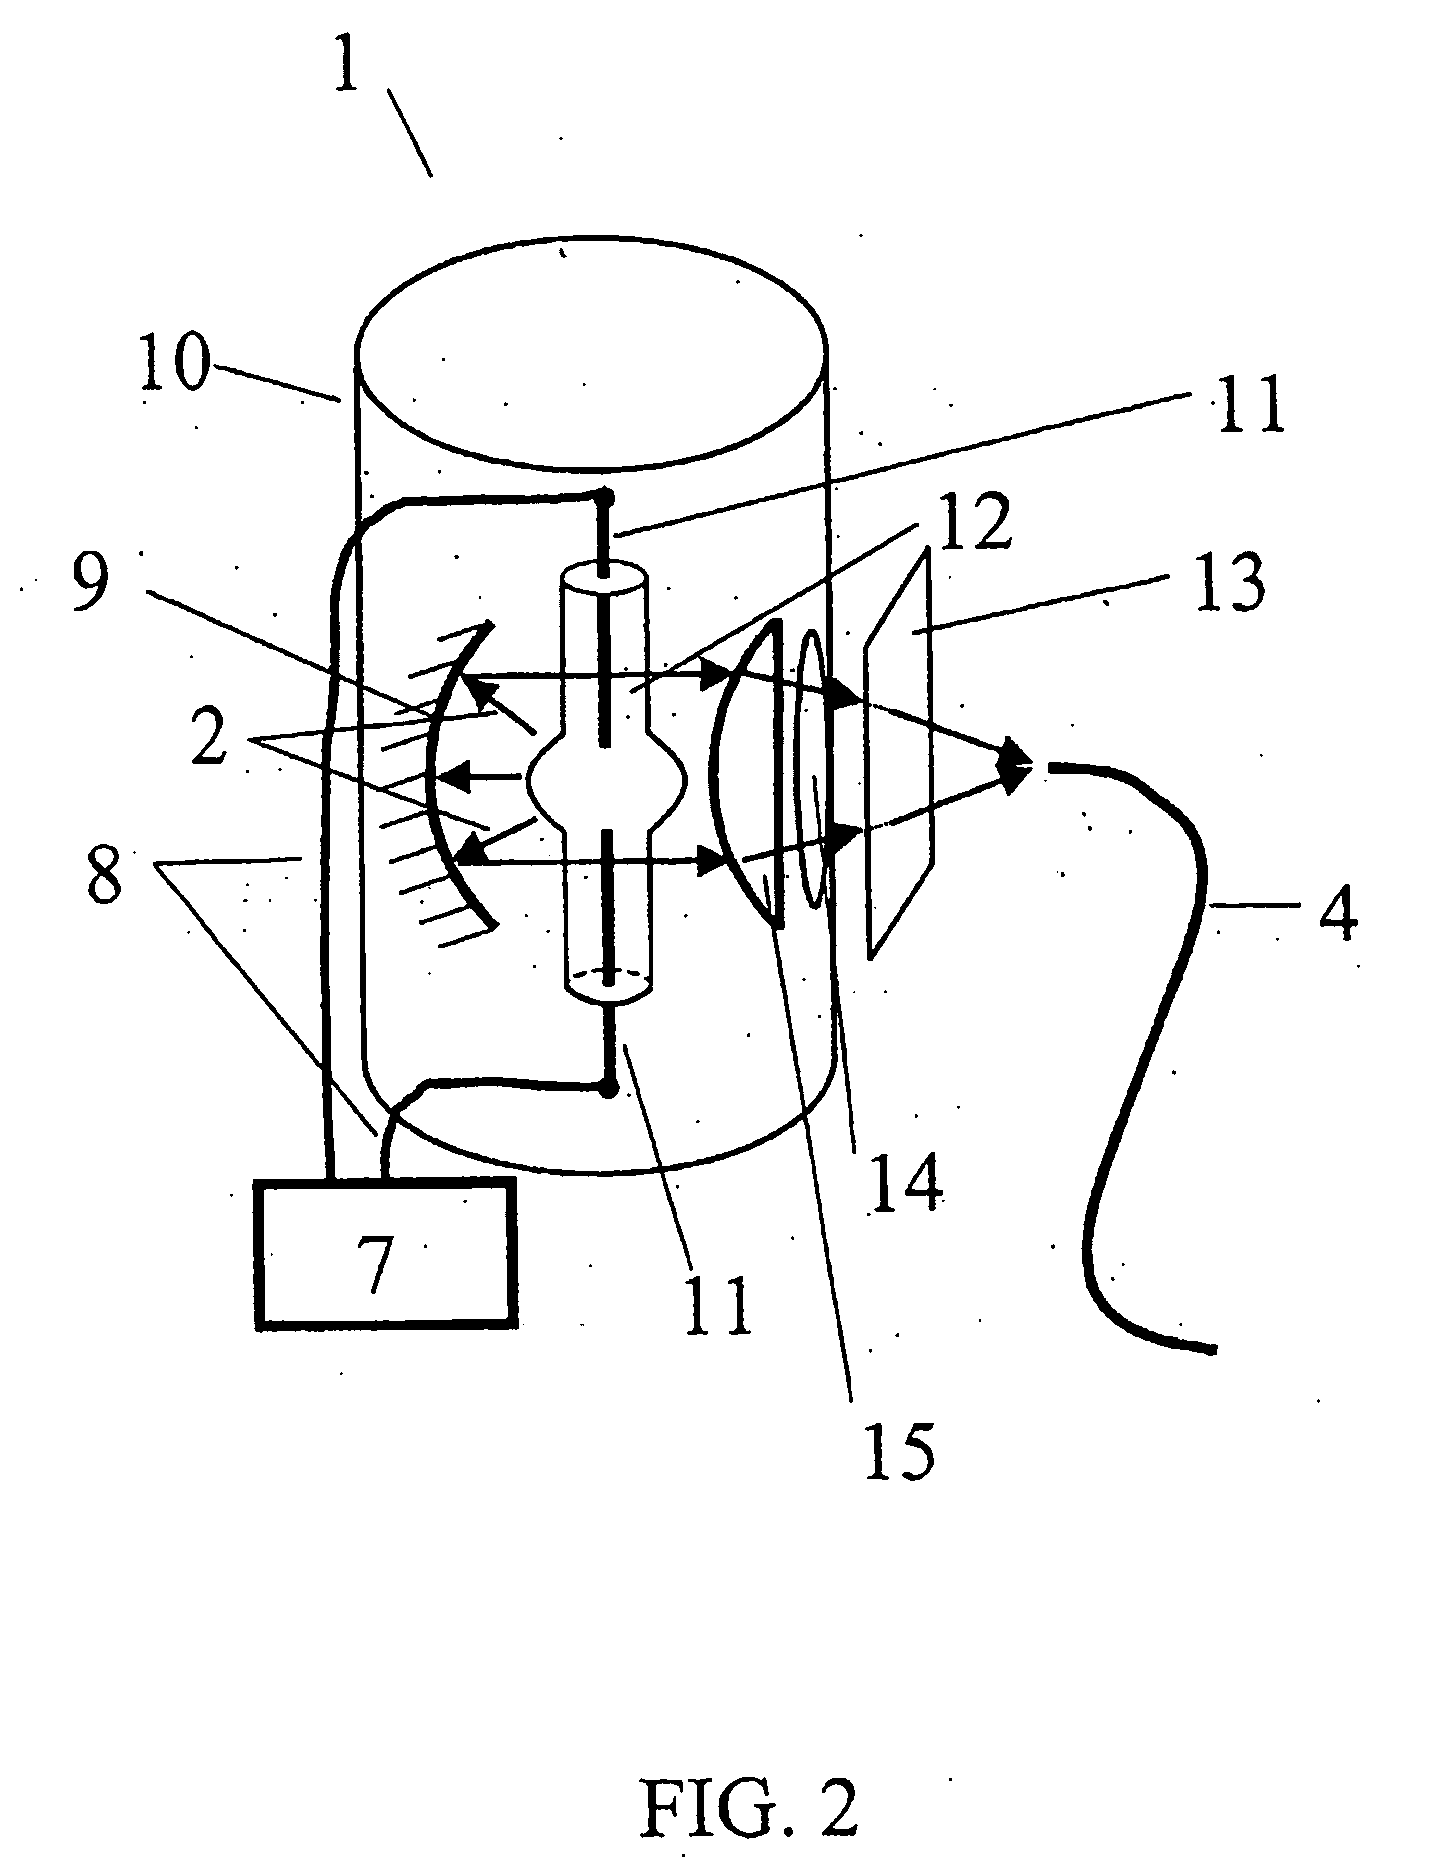 Phototherapeutical apparatus and method for the treatment and prevention of diseases of body cavities